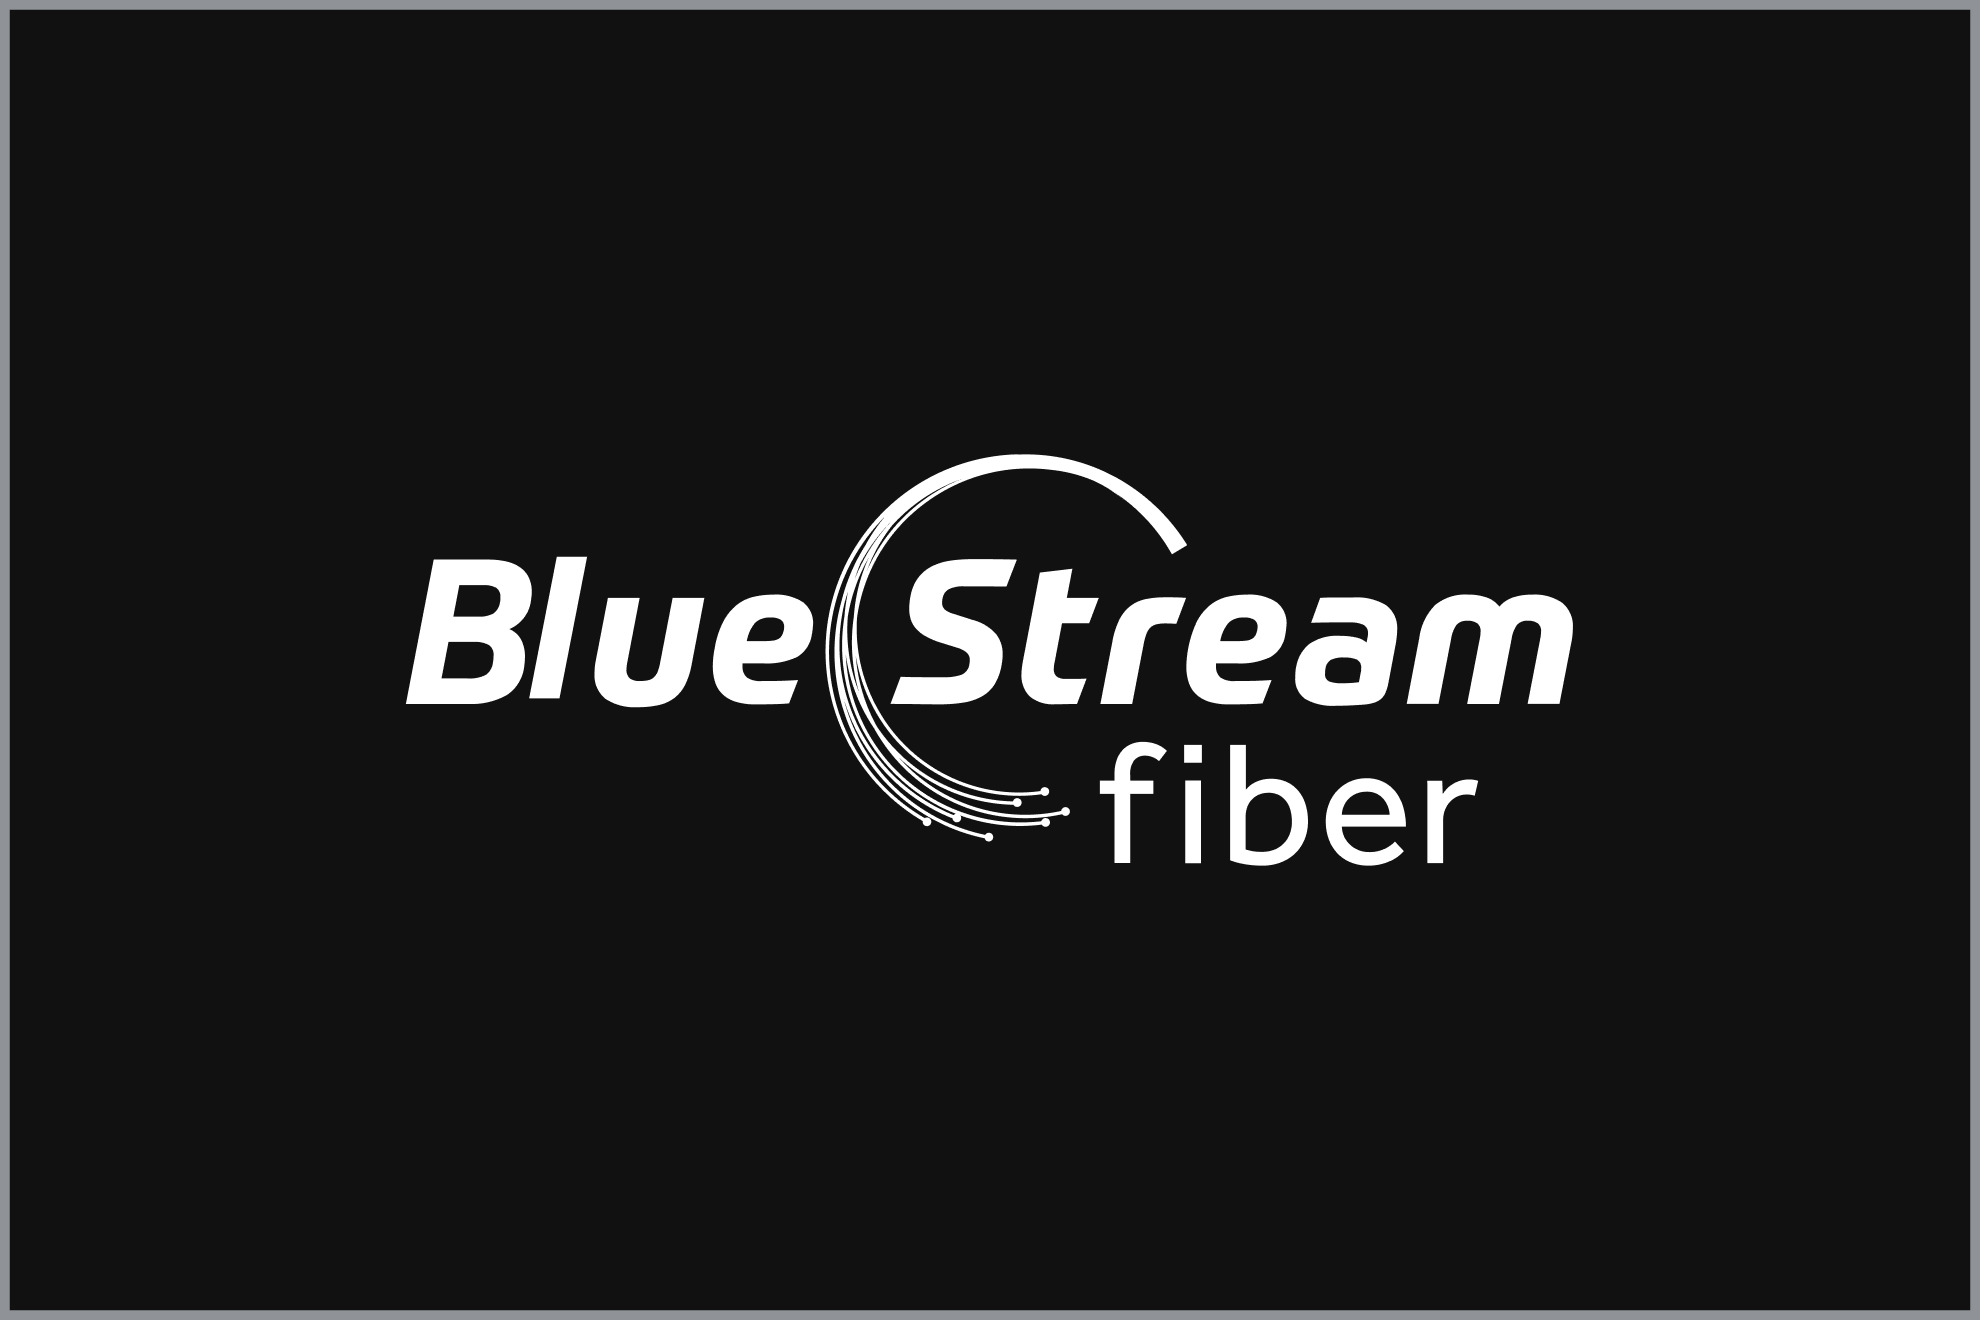 Evolution Digital and Blue Stream Fiber deploy OpenSync-enabled WiFi 6 products and Plume’s cloud services